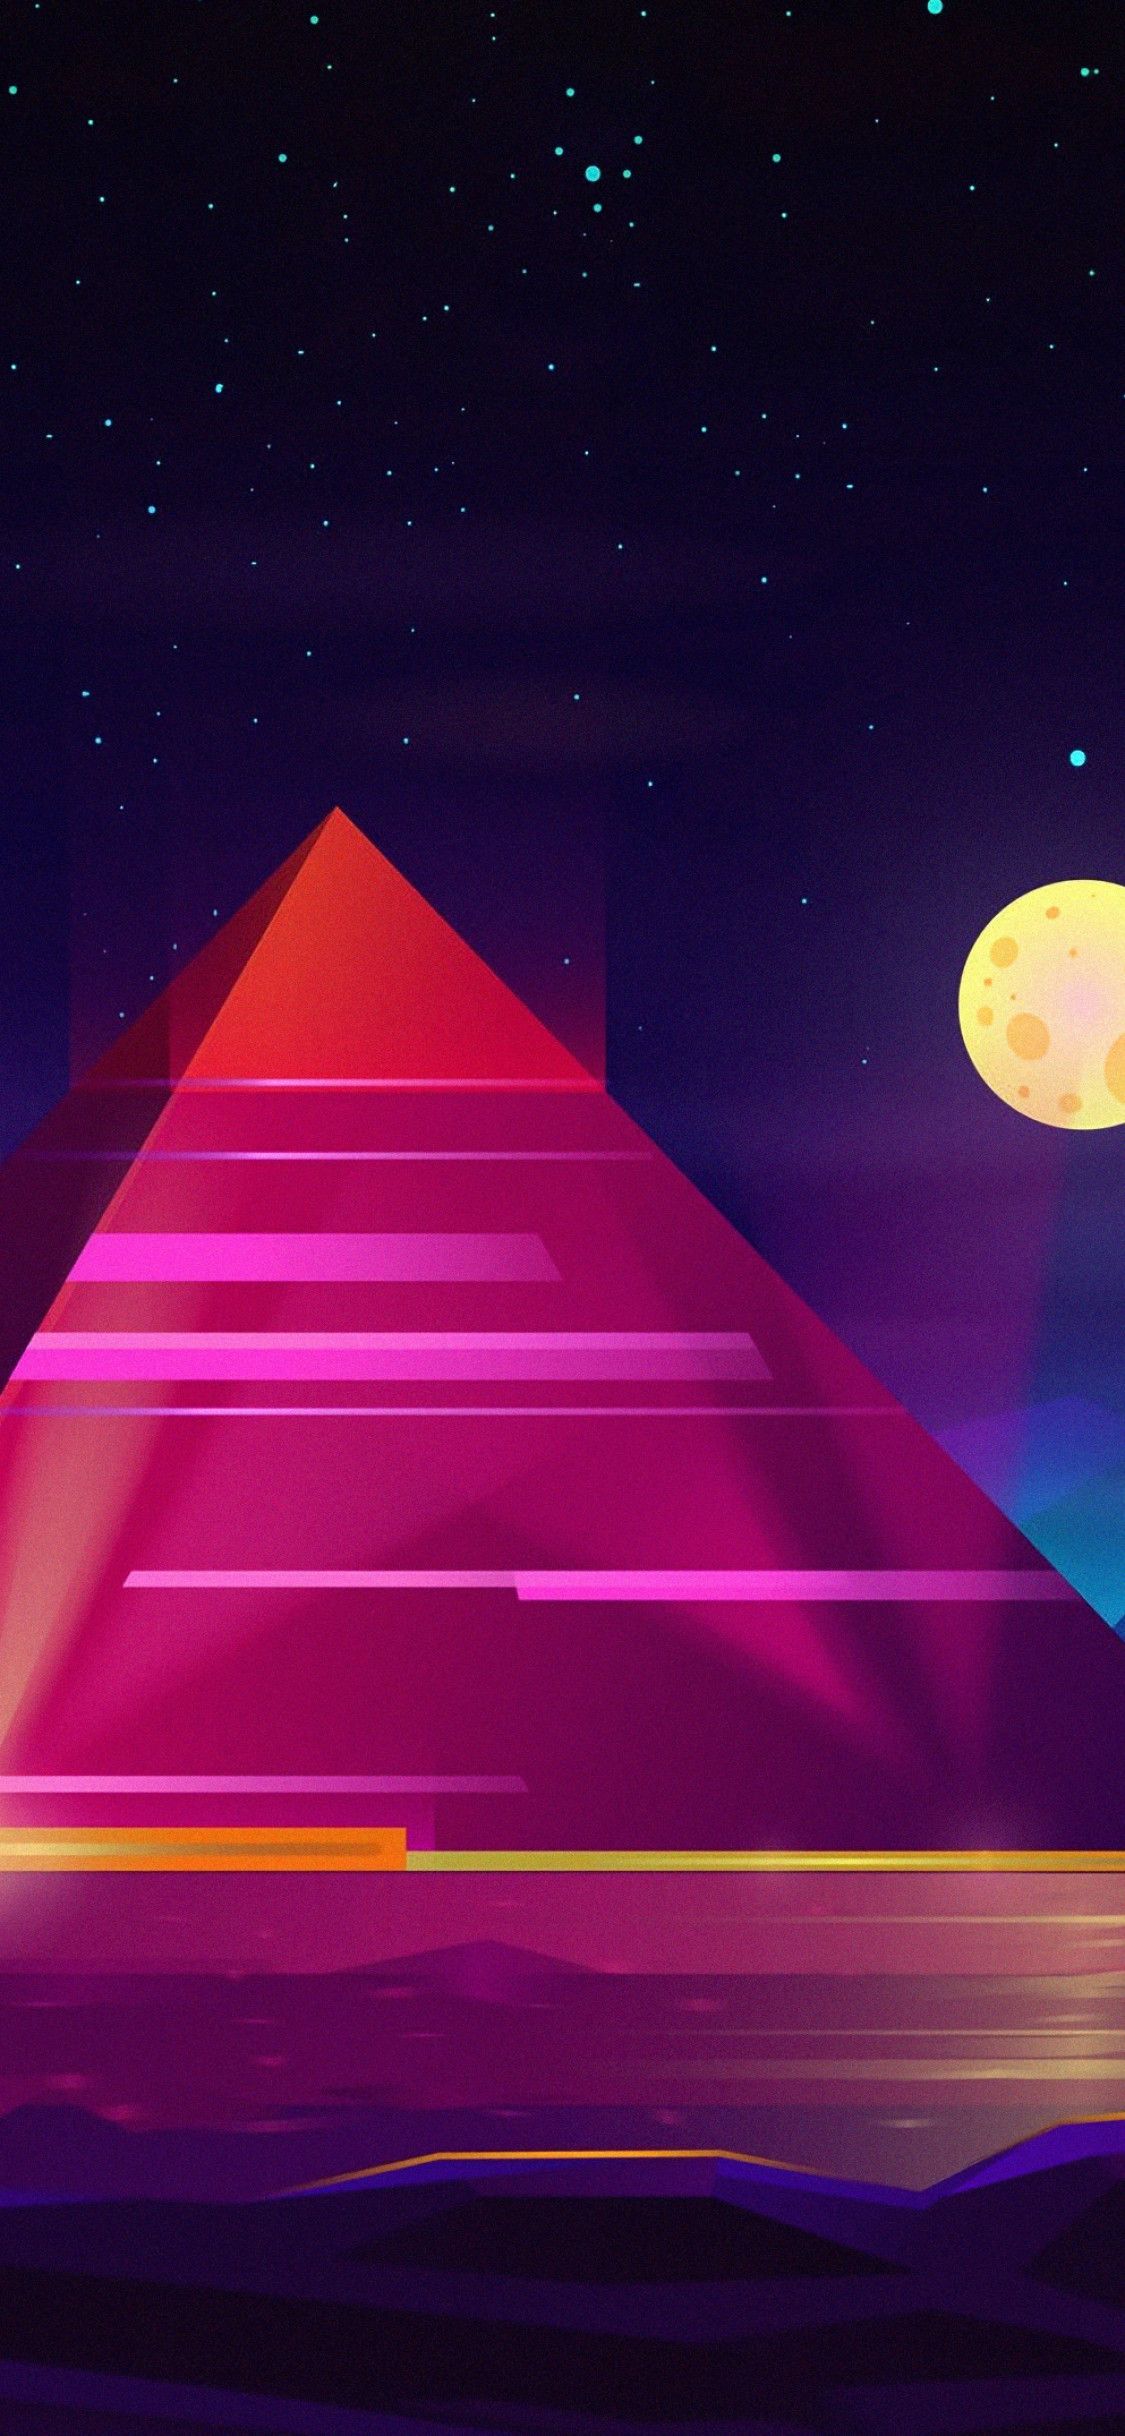 Pyramid Colorful Neon 4k iPhone XS, iPhone iPhone X HD